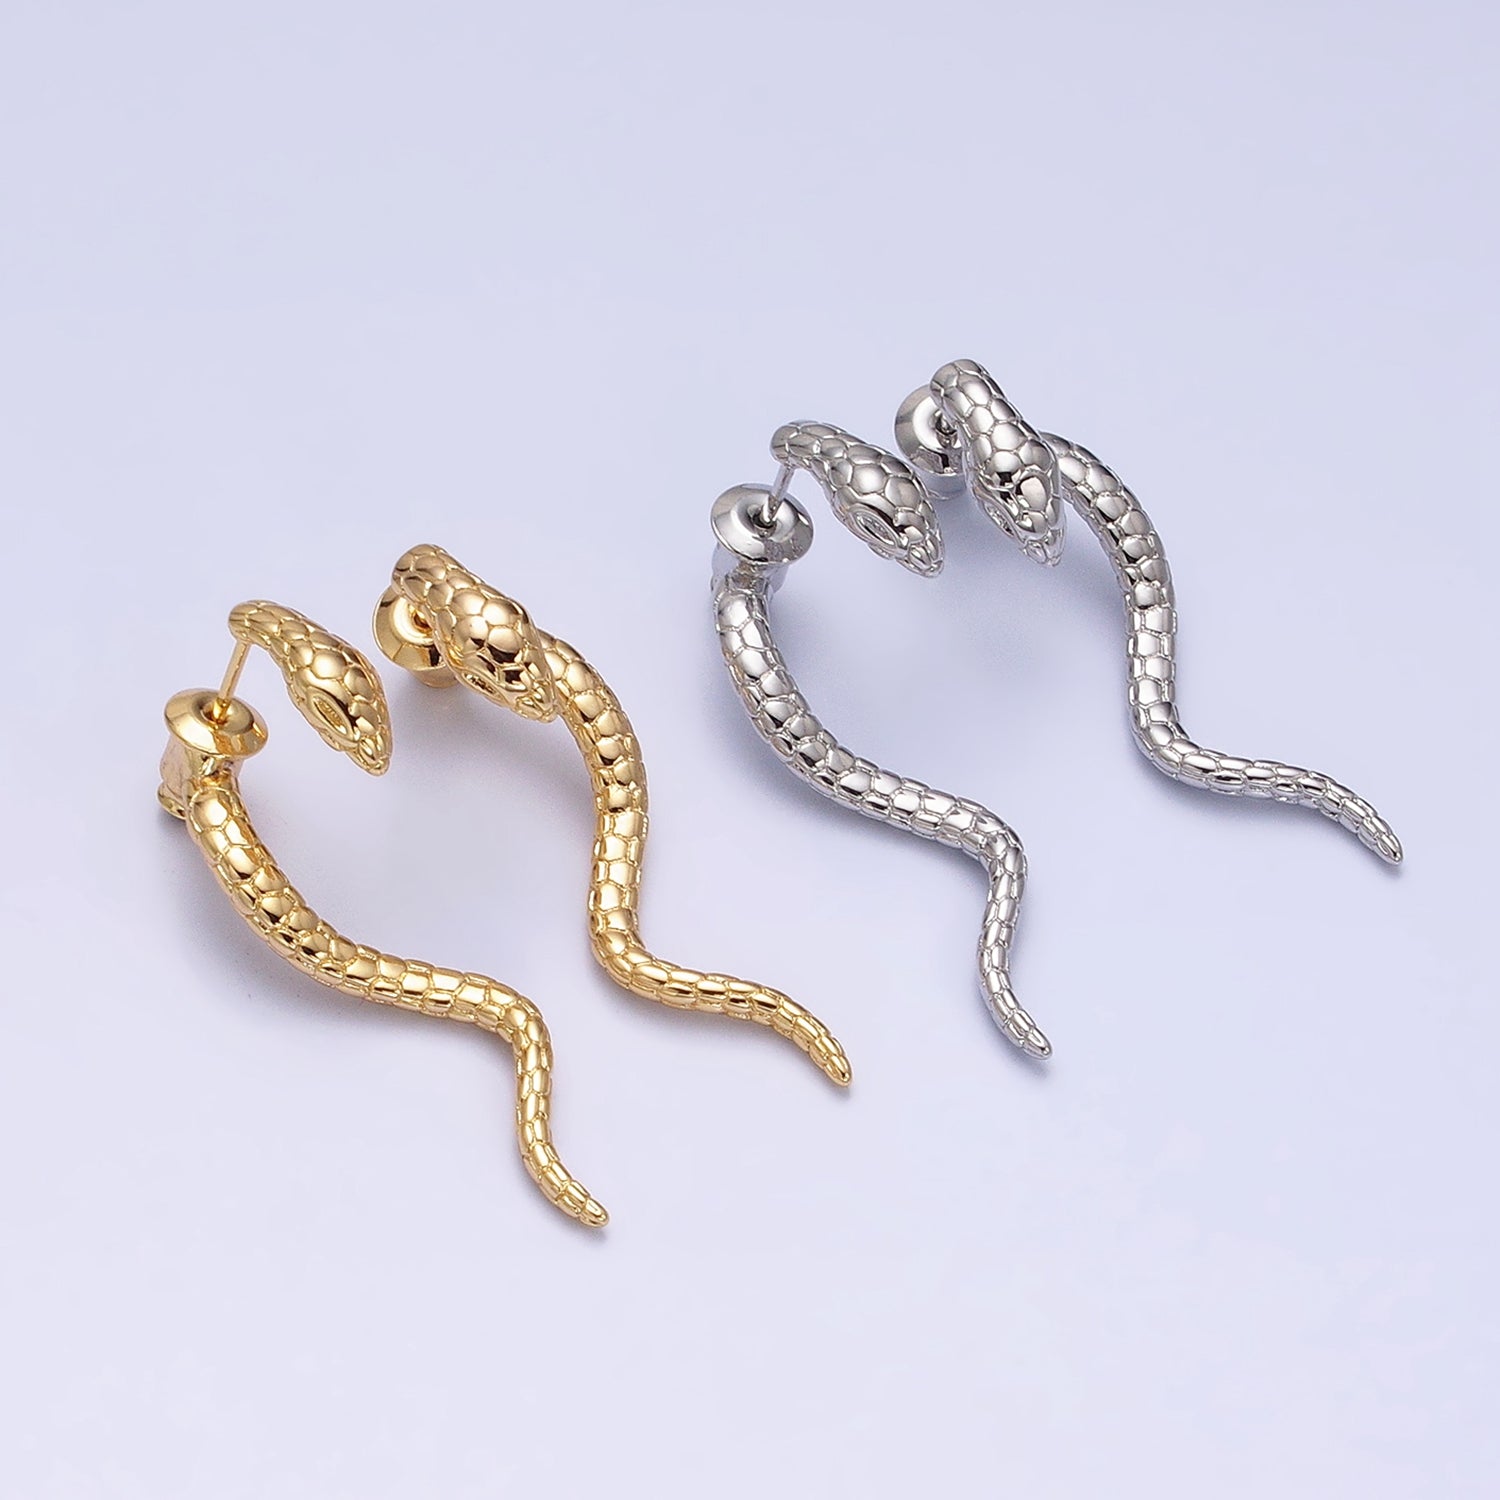 16K Gold Filled Snake Serpent Textured Wavy Drop Stud Earrings in Gold & Silver | AD1476 AD1477 - DLUXCA